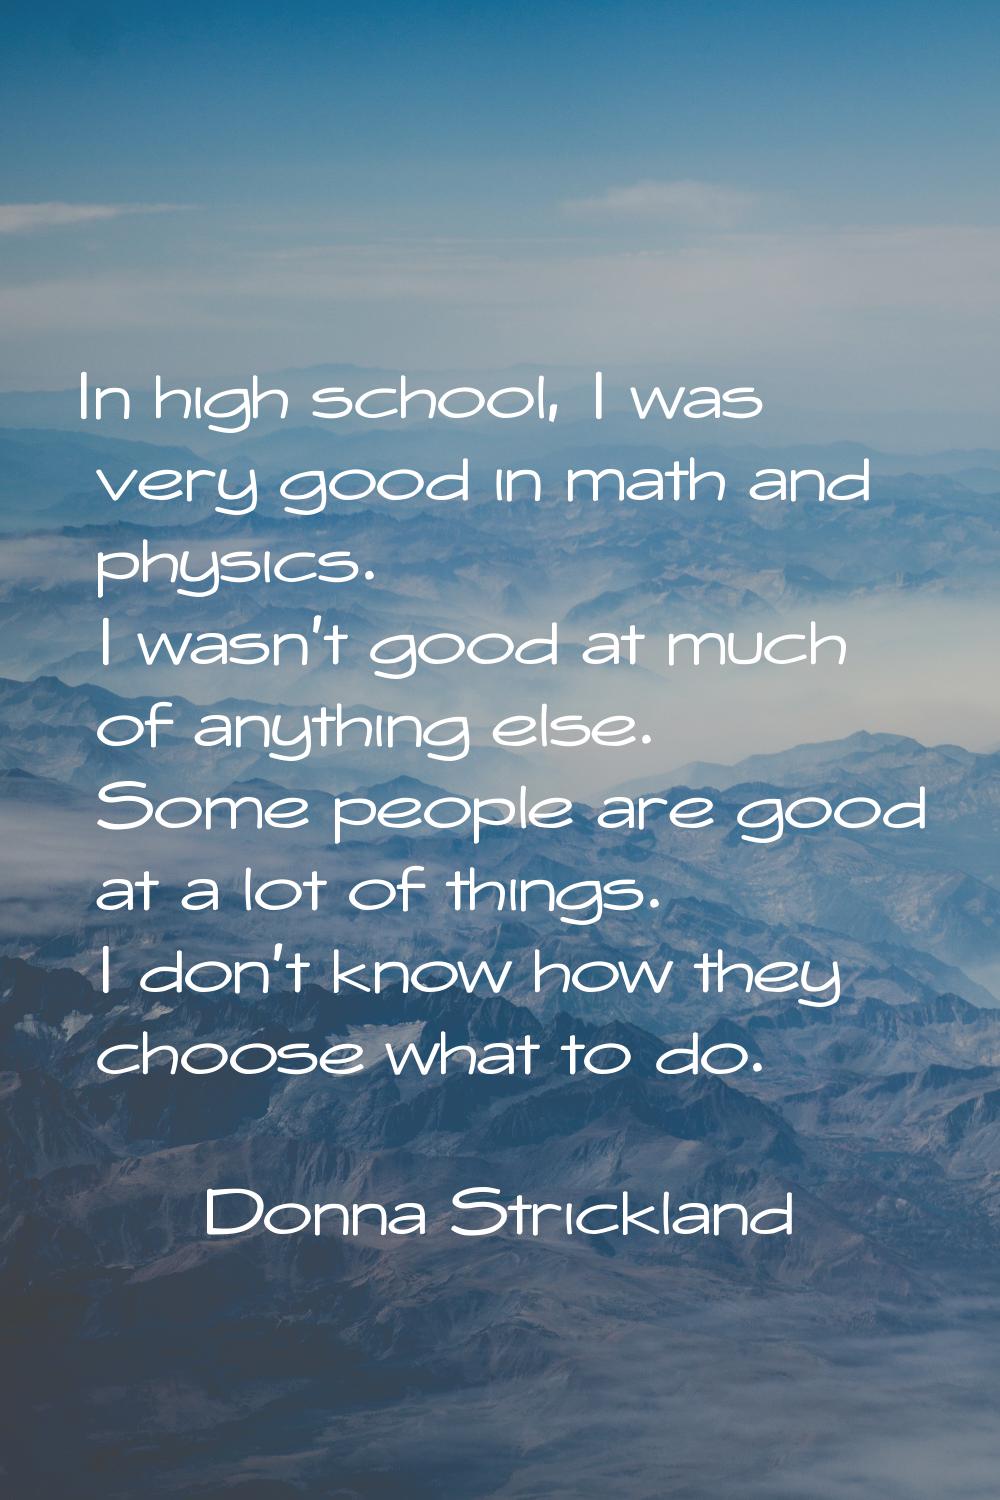 In high school, I was very good in math and physics. I wasn’t good at much of anything else. Some p